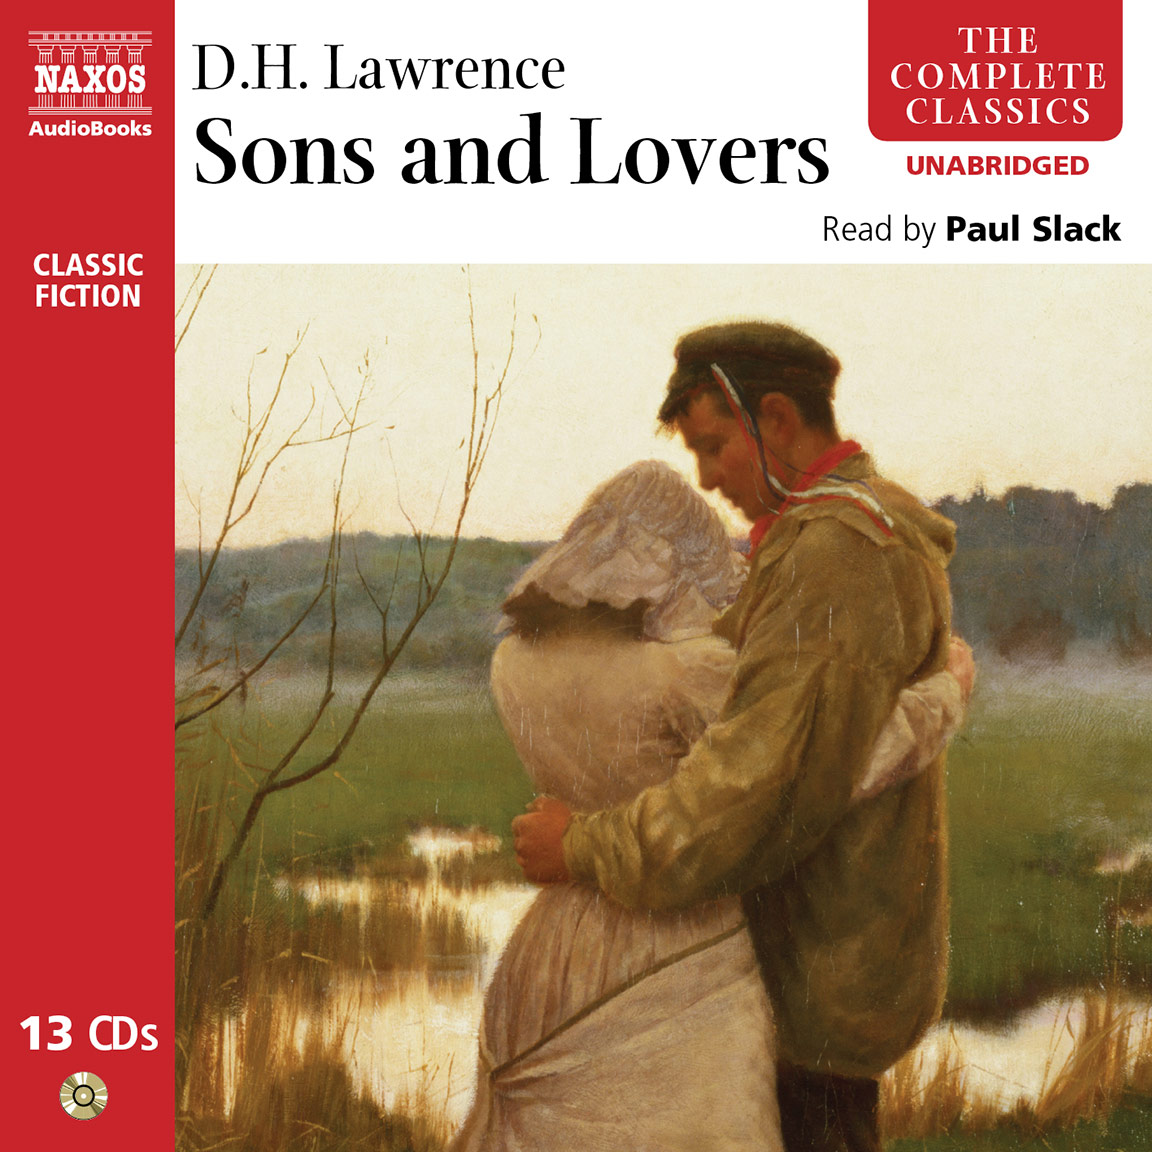 sons and lovers as an autobiographical novel